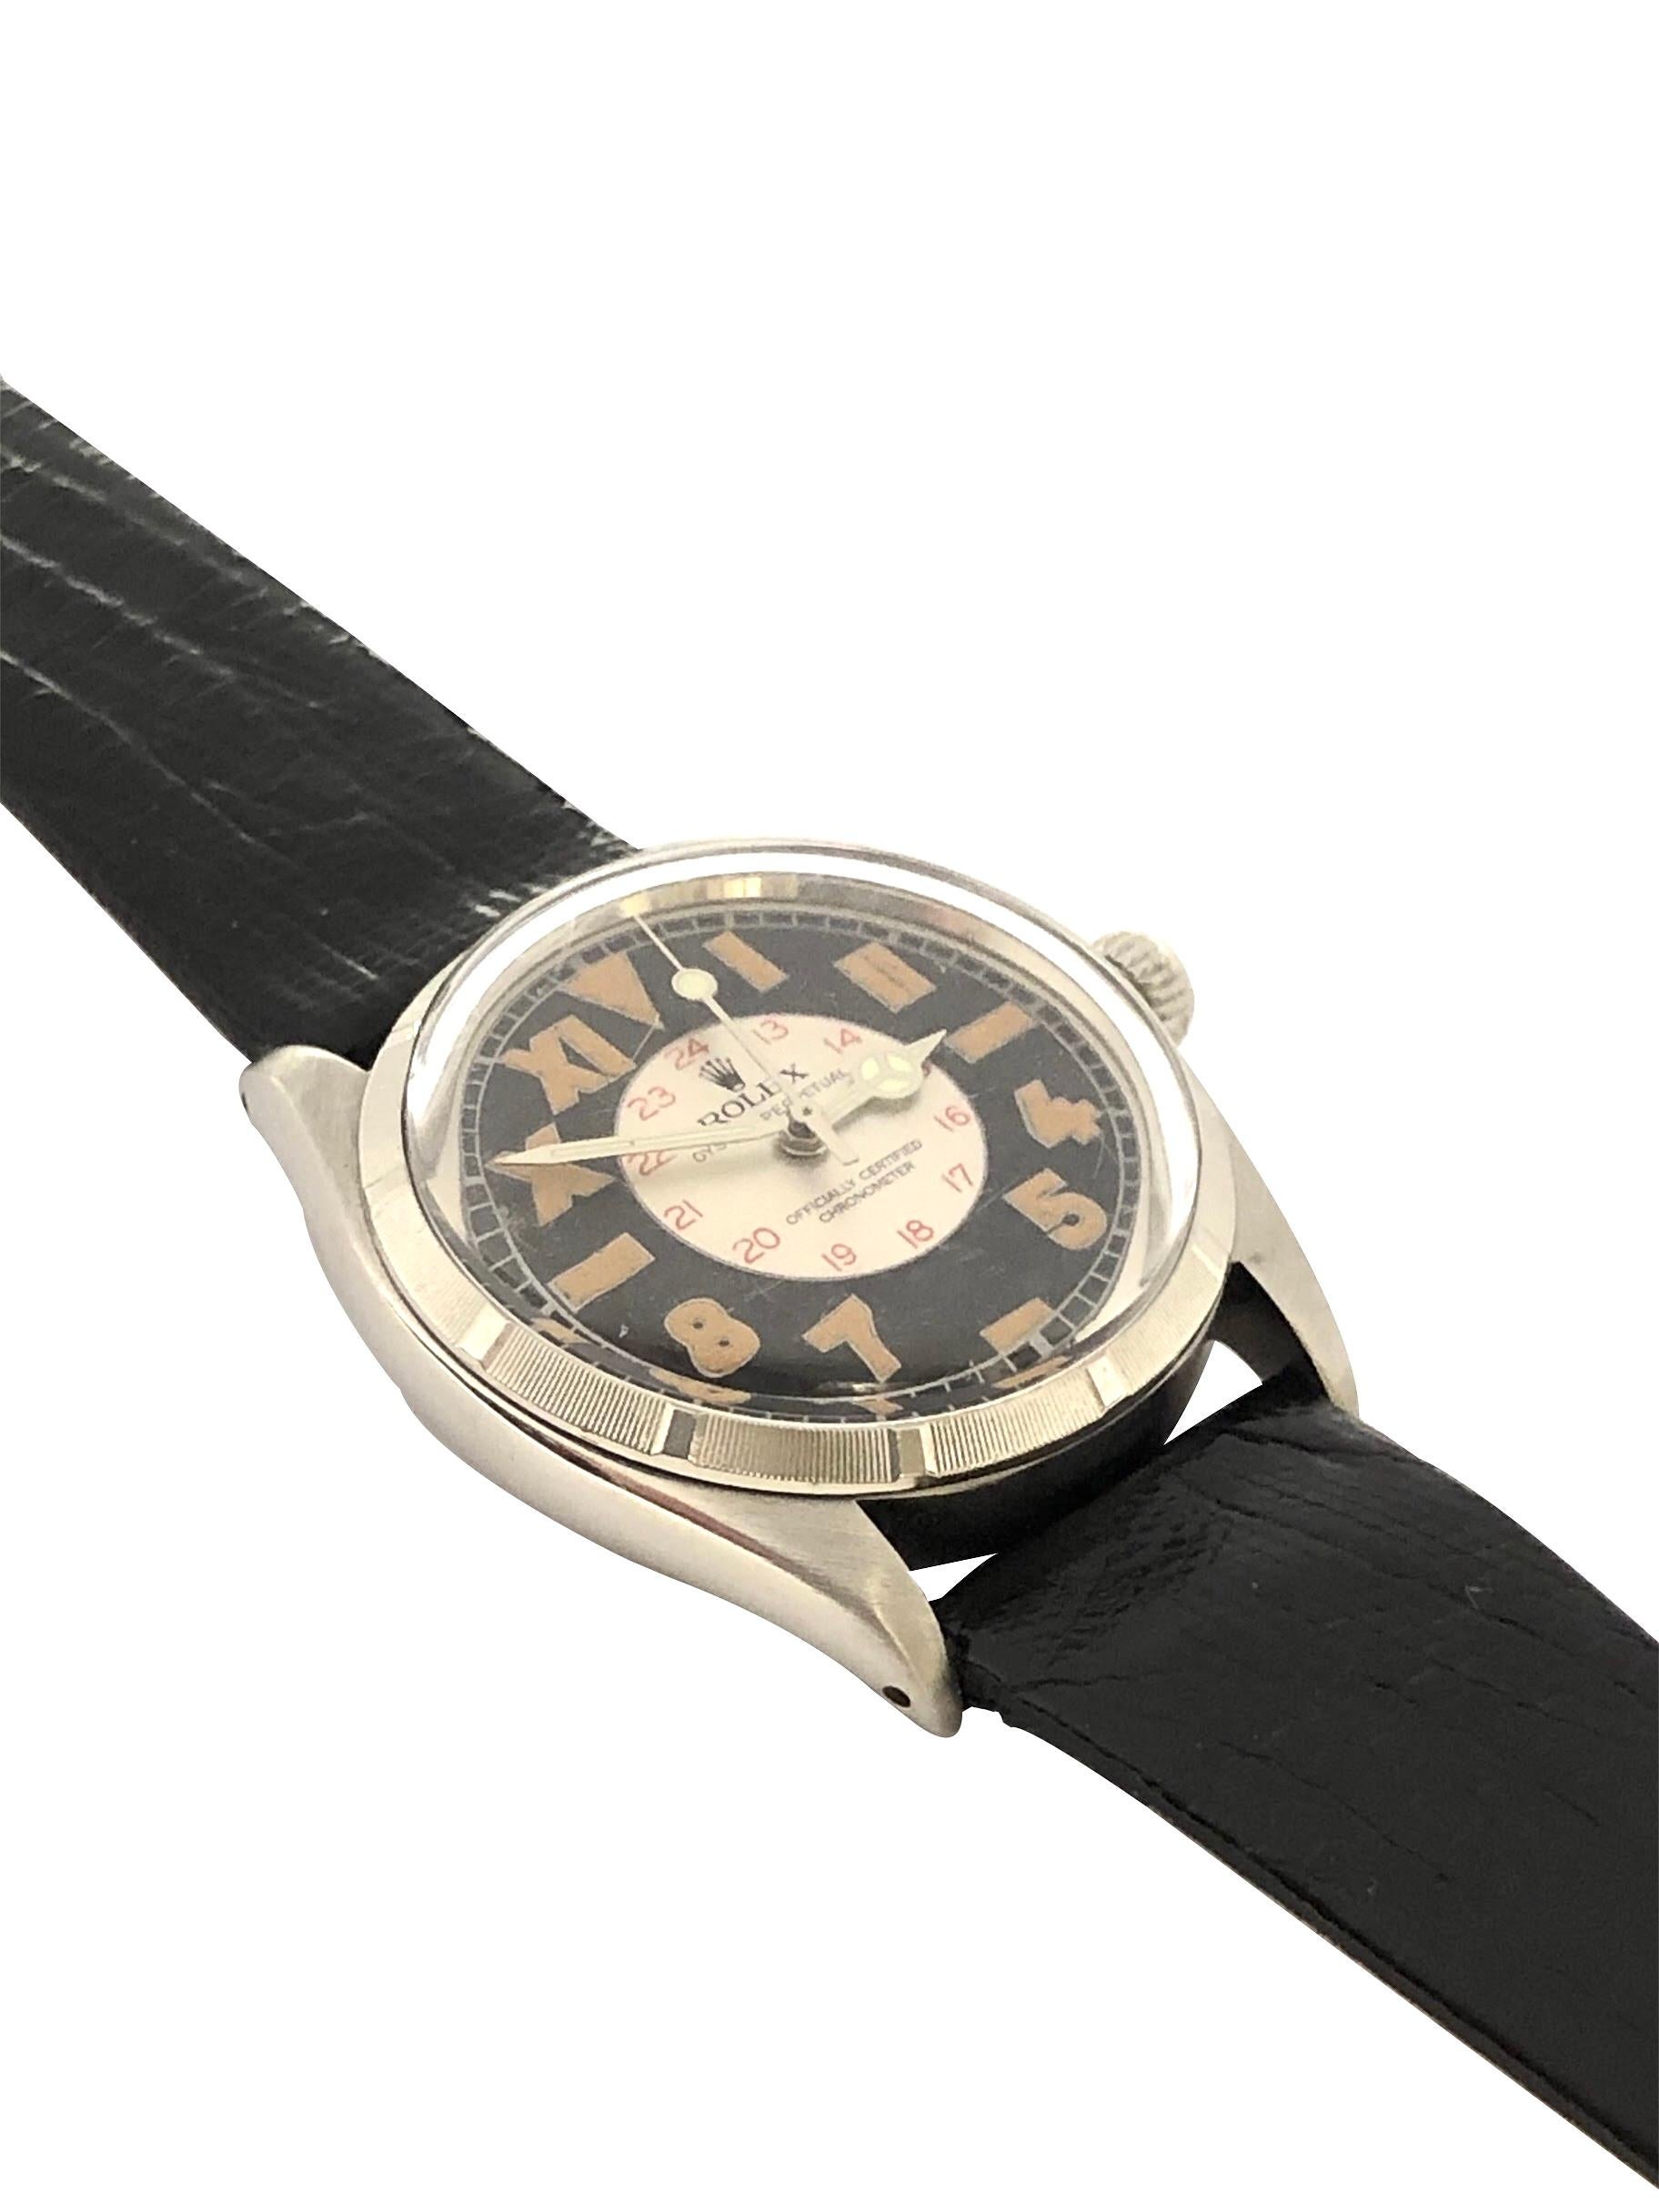 Circa 1944 Rolex Reference 6565 Wrist watch, 34 M.M. Stainless Steel 2 Piece Oyster case with Engine Turned Bezel, Caliber 1030 Automatic, self Winding movement, Rolex logo crown. Restored Black and Silver Bubble Back style 